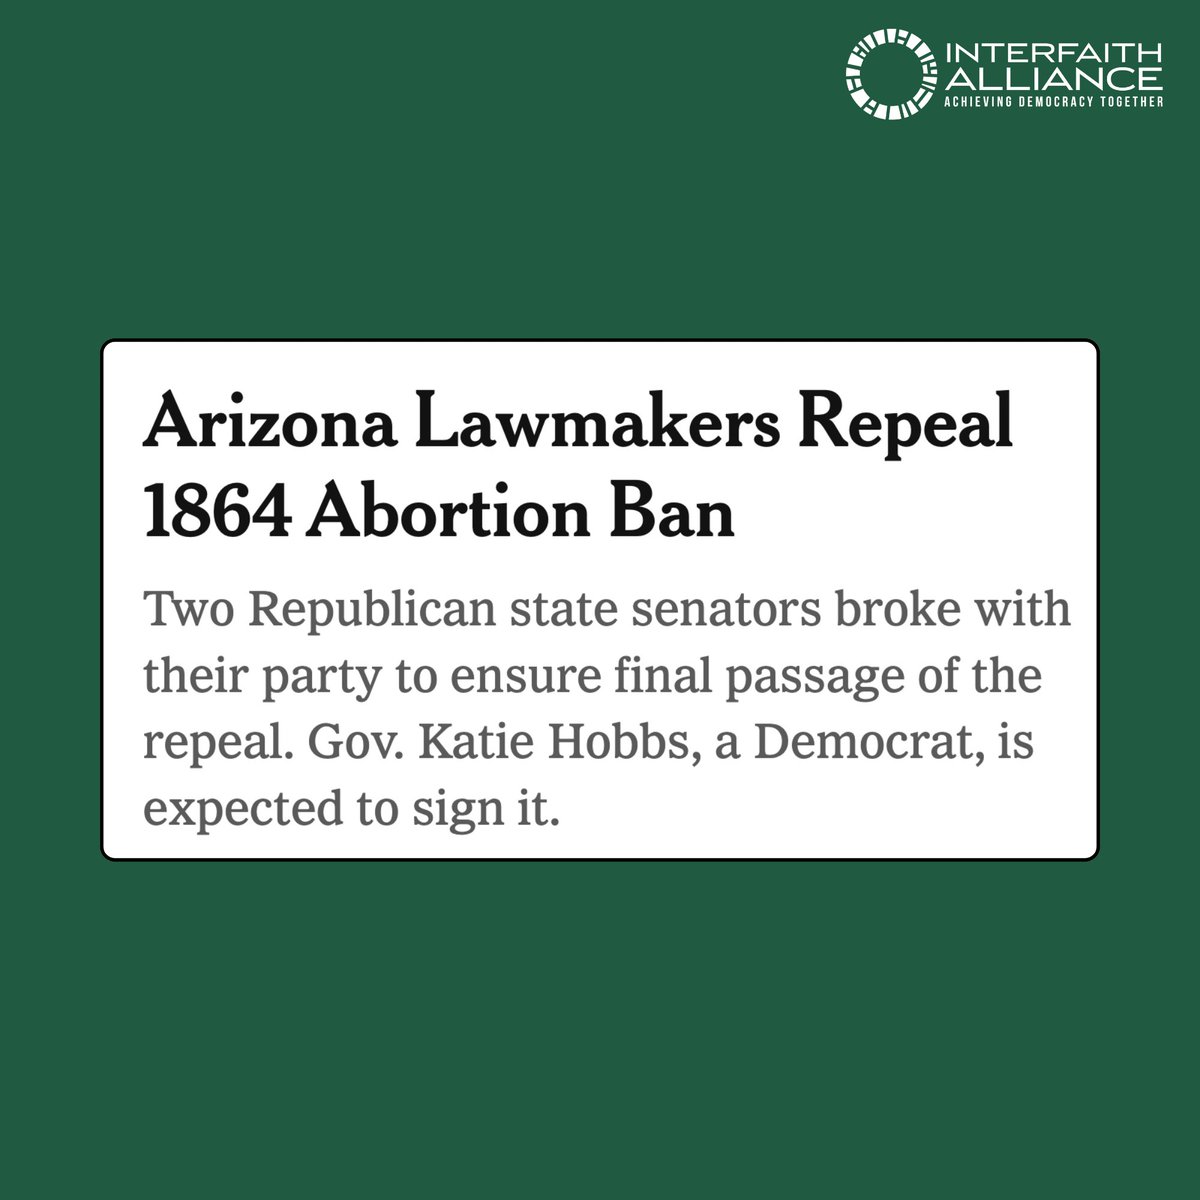 This is a relief, but the 1864 abortion ban may still be in effect for several months. Getting abortion on the ballot in Arizona 🌵 is crucial. As people of diverse faiths and beliefs, we believe no one religion has a right to determine what other people do with their bodies.